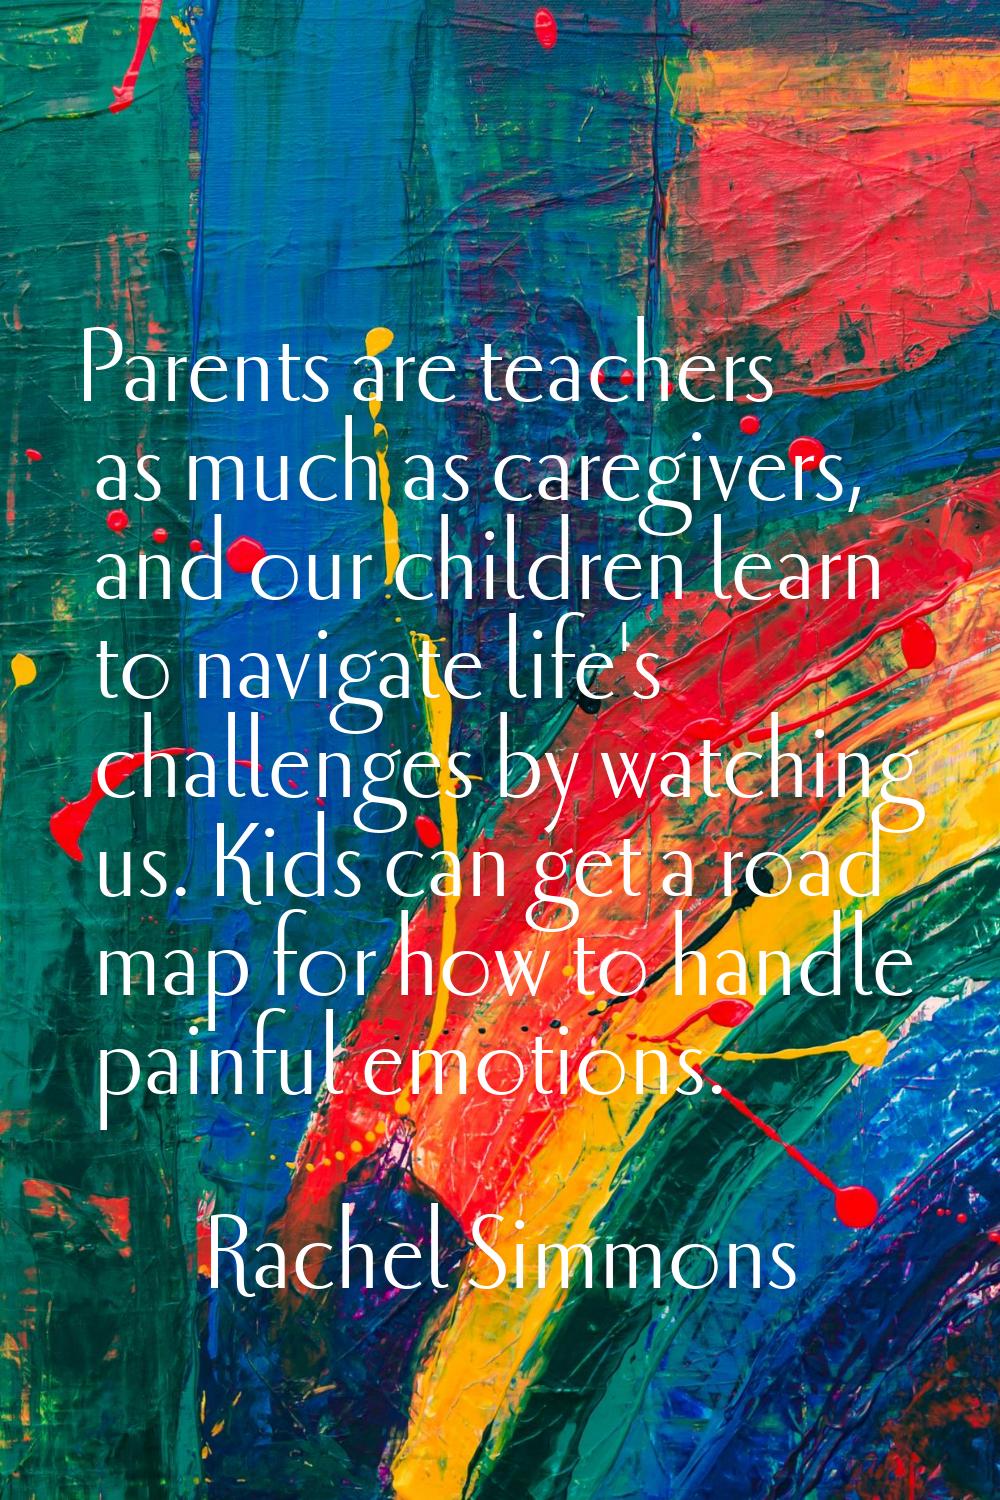 Parents are teachers as much as caregivers, and our children learn to navigate life's challenges by